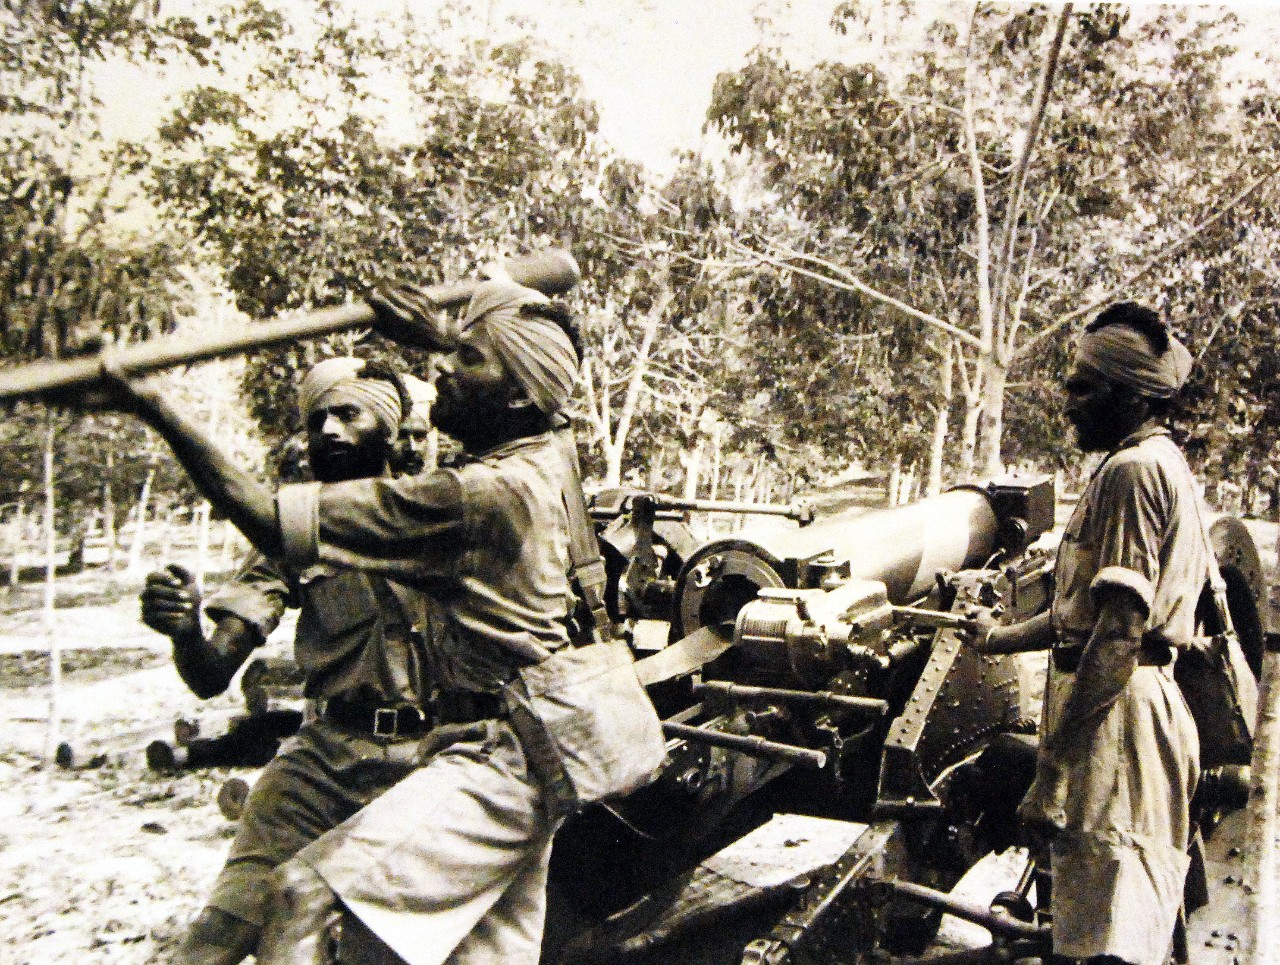 Lot 11612-5: Malayan Campaign, December 1941-January 1942.  Singapore, 1942. The troops defending Malaya, besides British, Scottish, Australian and Malayan units, including Indian troops.  Photograph shows Indian gunners in training with field artillery.   Office of War Information Photograph. Courtesy of the Library of Congress. (2016/01/22).